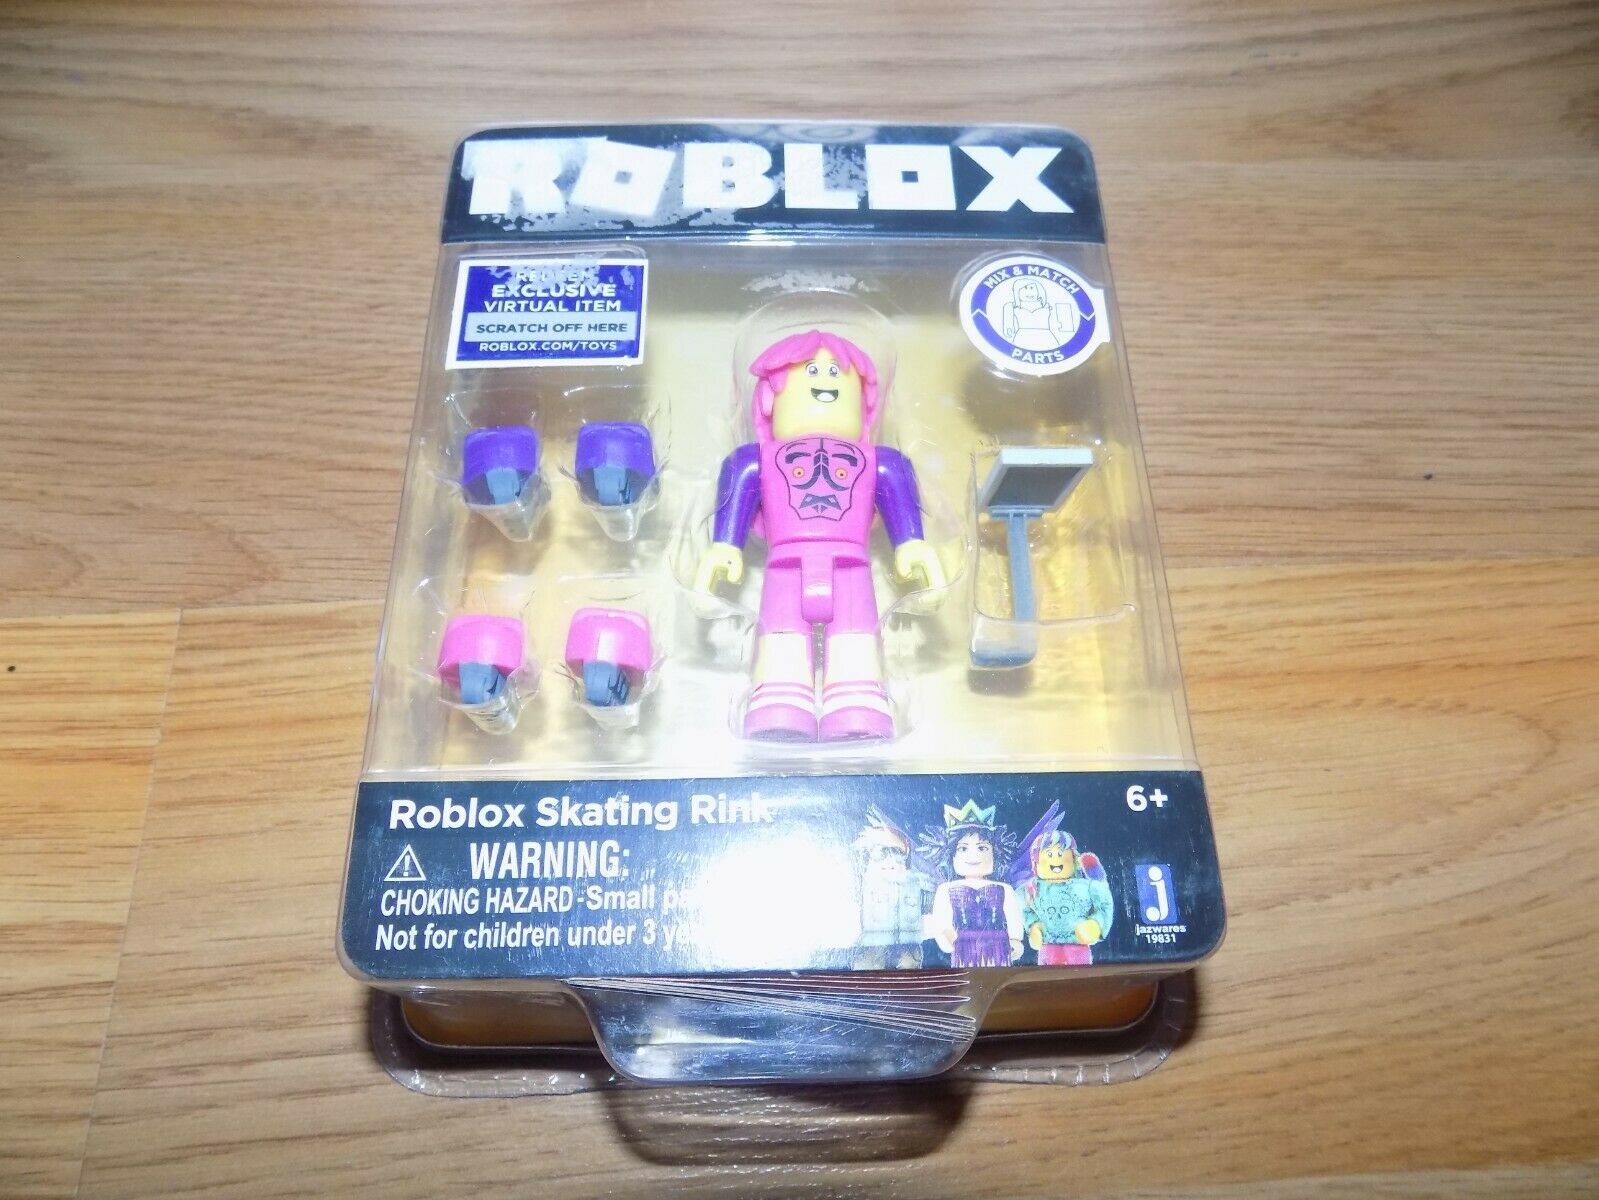 Roblox Skating Rink Action Figure Toy Mix And 50 Similar Items - amazon com roblox action collection apocalypse rising 4x4 vehicle includes exclusive virtual item toys games